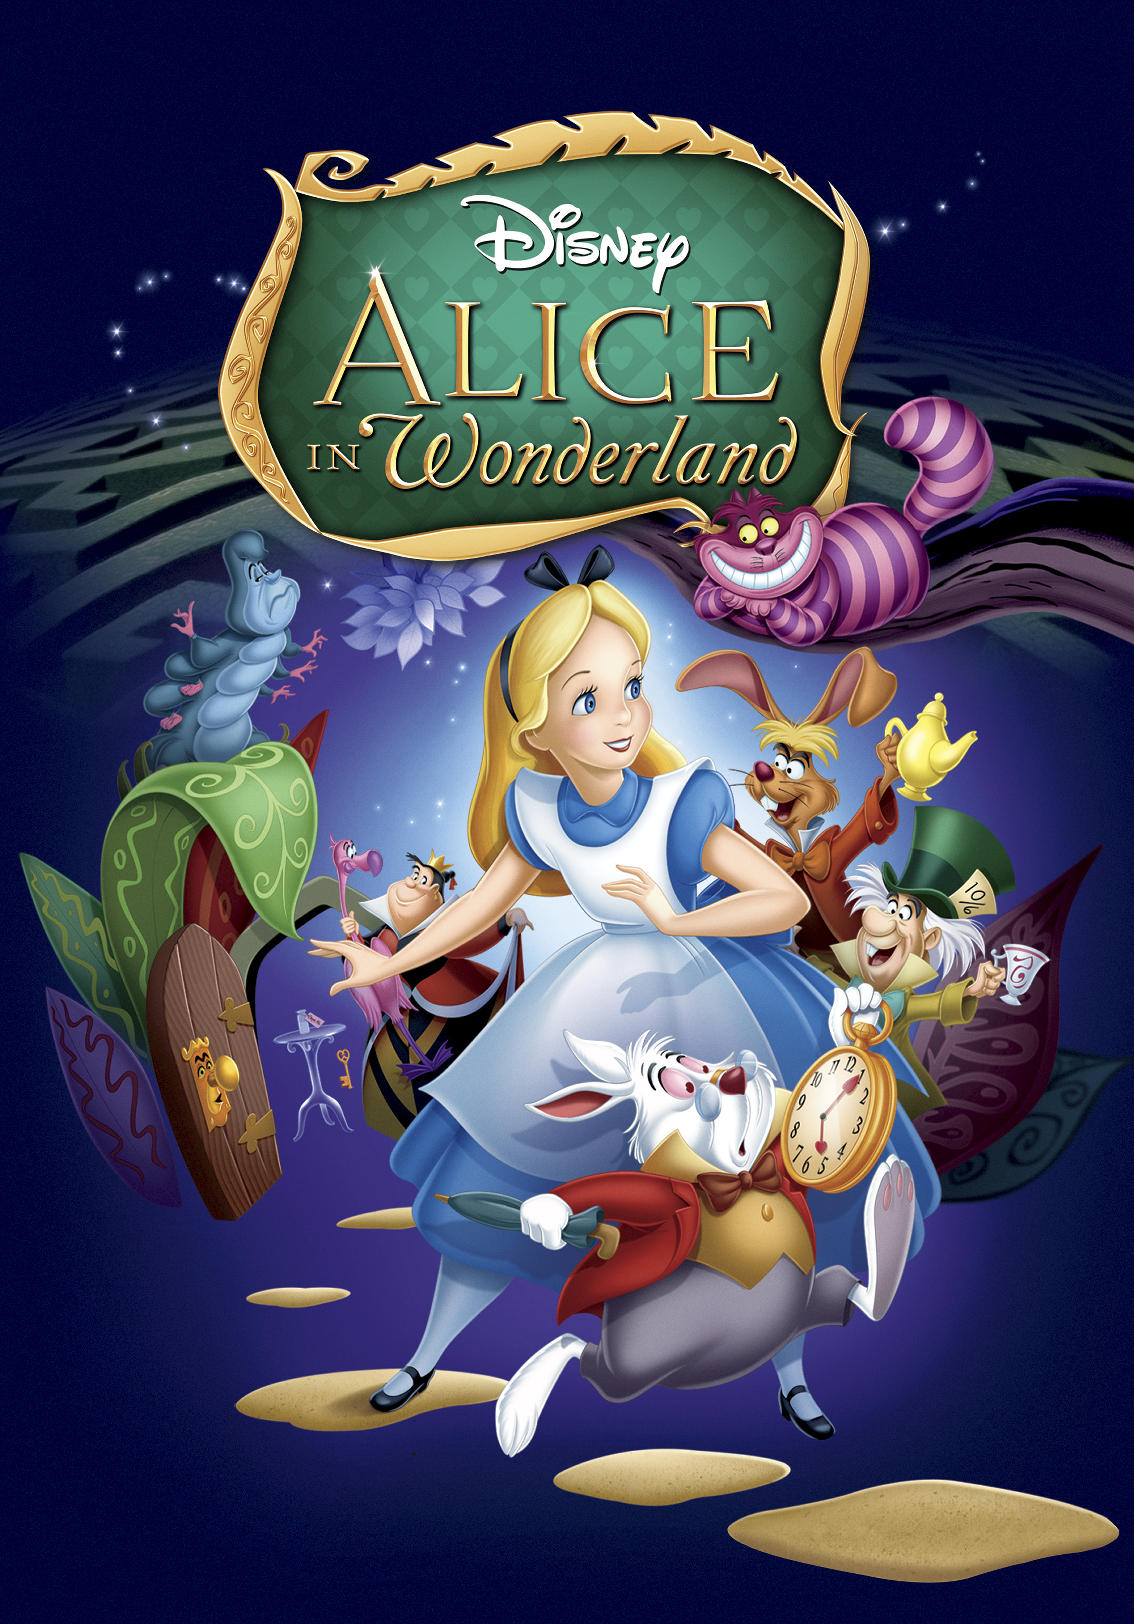 Draw Me: A history of the illustrated Alice